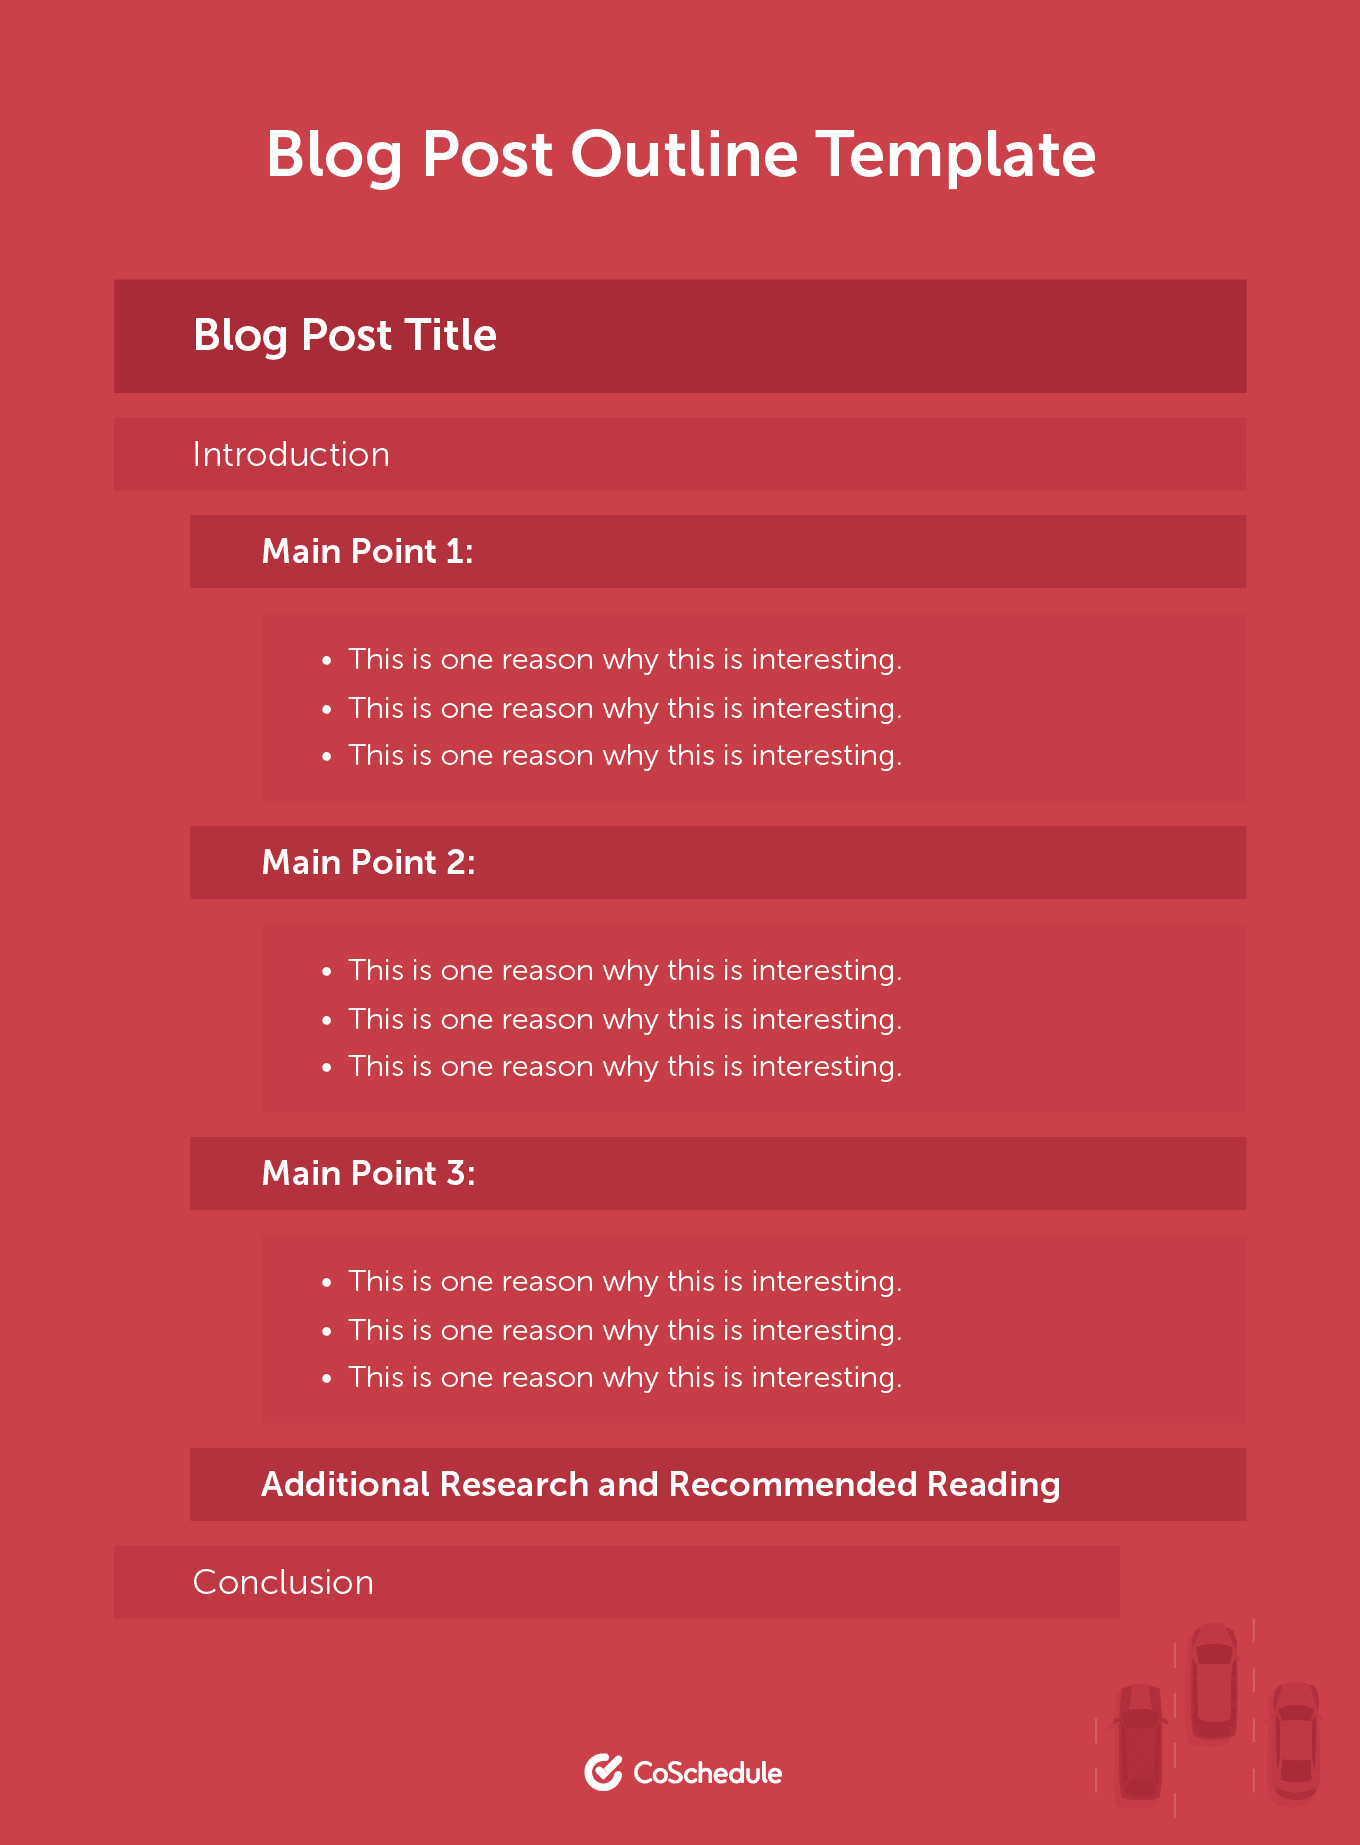 Example of a Blog Post Outline Template